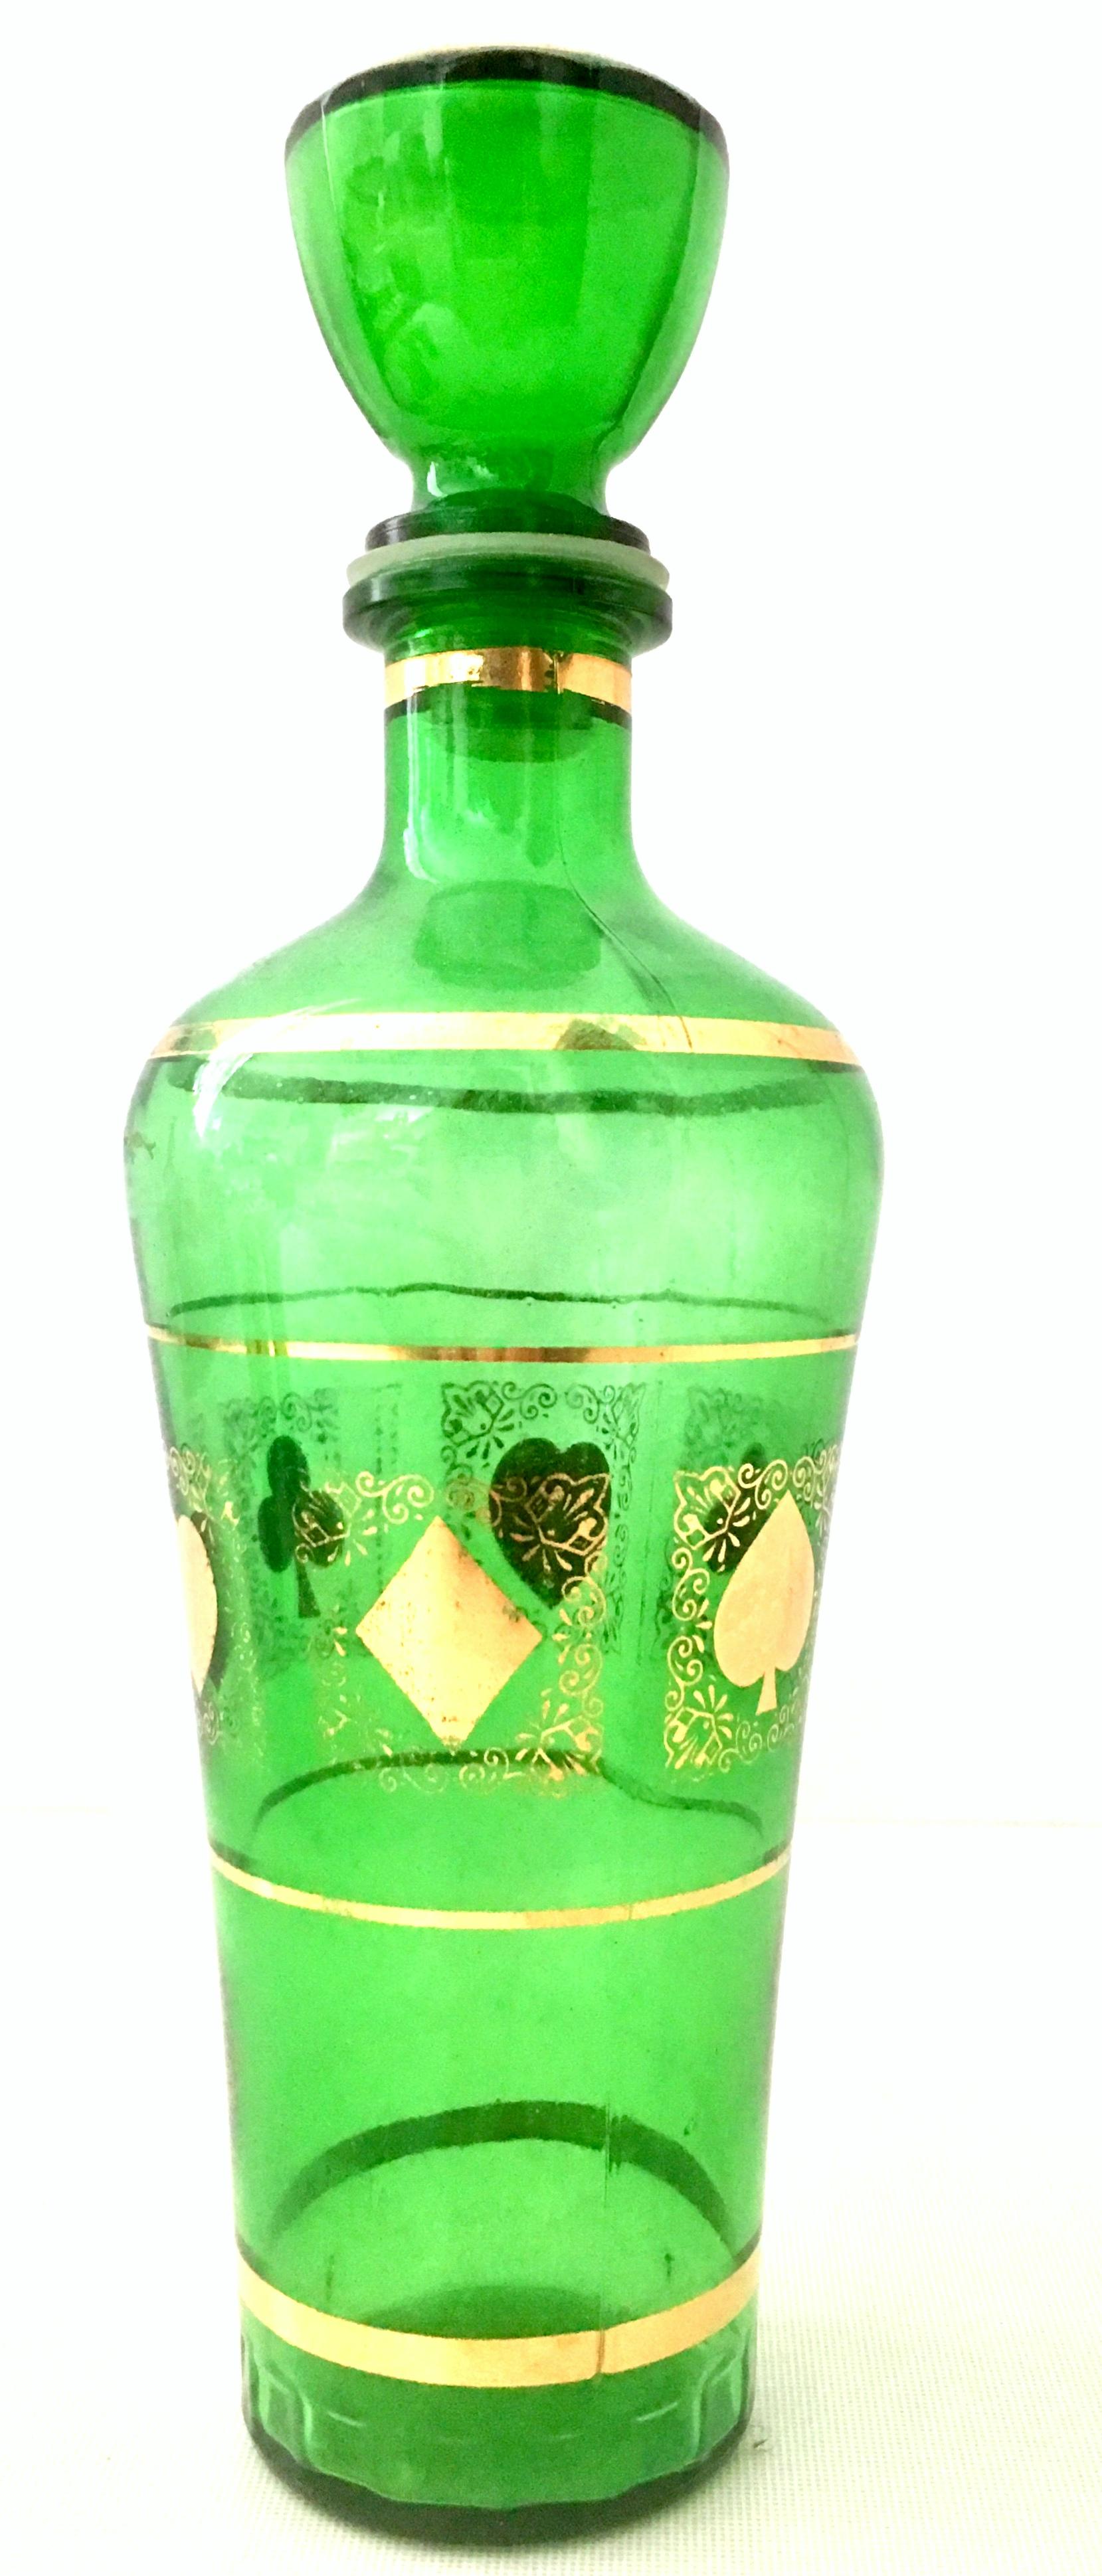 Mid-20th century blown glass & 22k gold drinks set of four pieces. This unique and coveted blown glass and 22K Gold embellished drinks set features a deck of playing card motif. Set Includes one decanter with stopper and three shot glasses. To